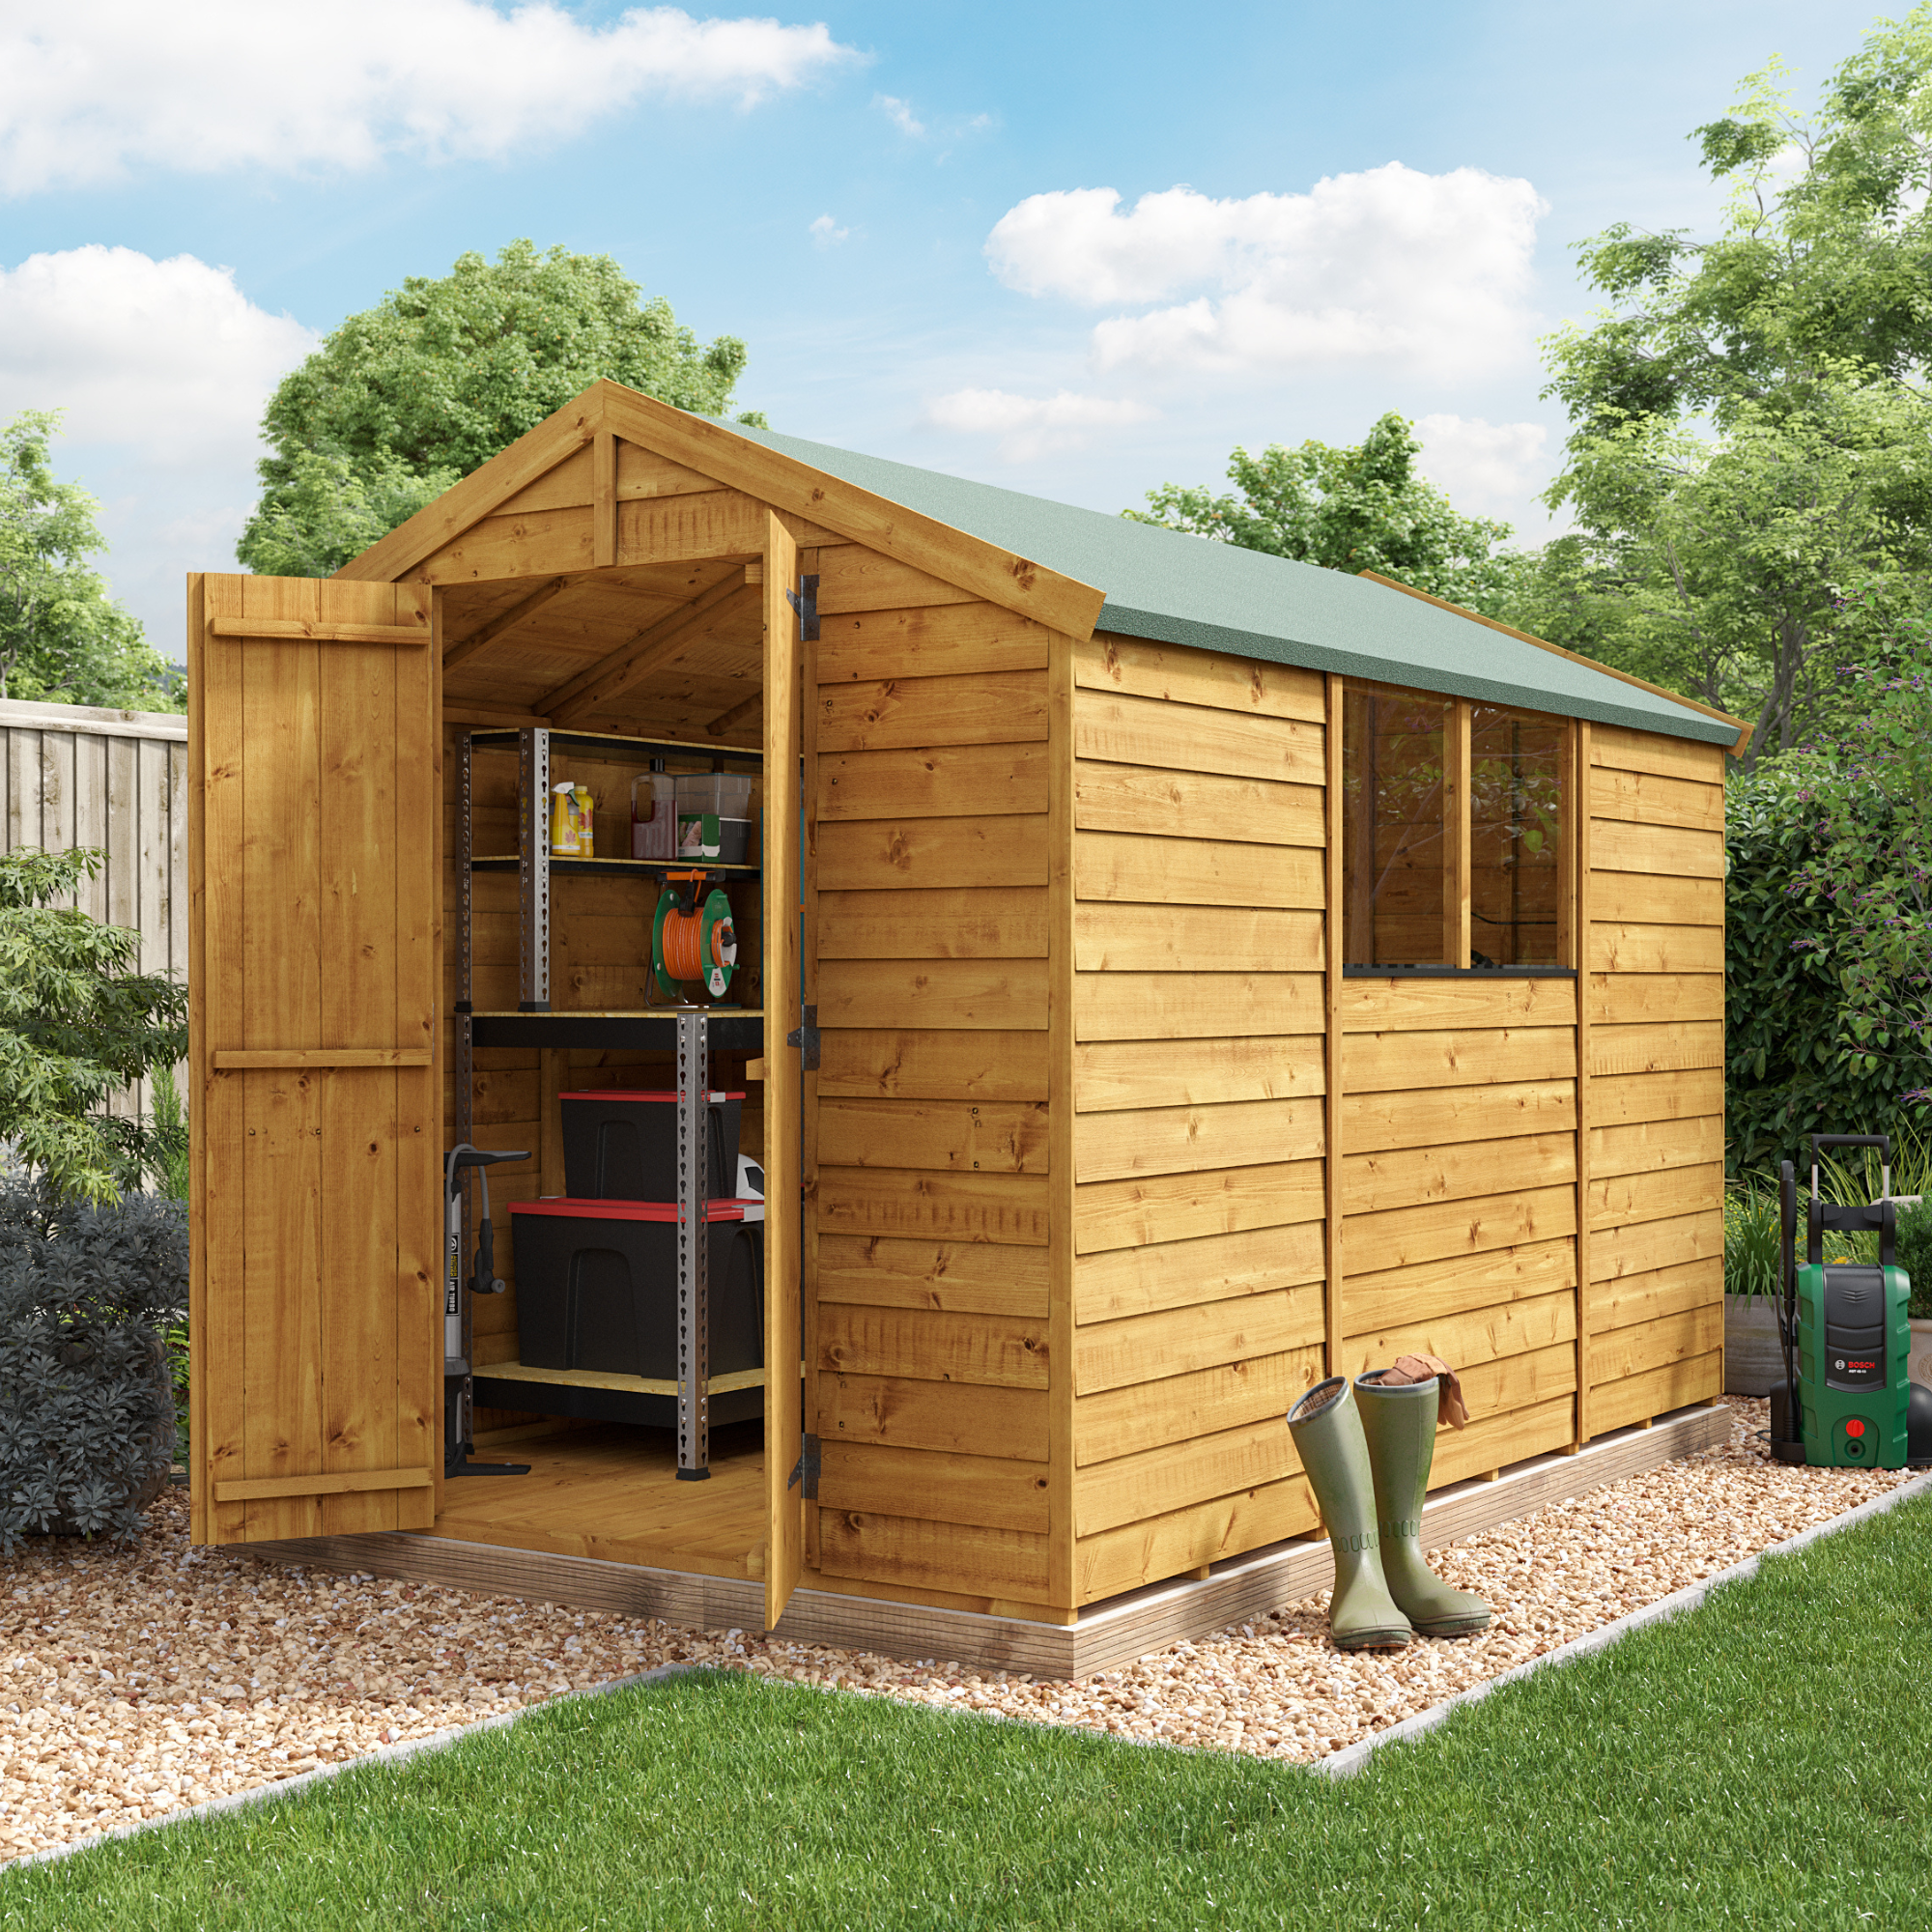 10 x 6 Shed - BillyOh Keeper Overlap Apex Wooden Shed - Windowed 10x6 Garden Shed